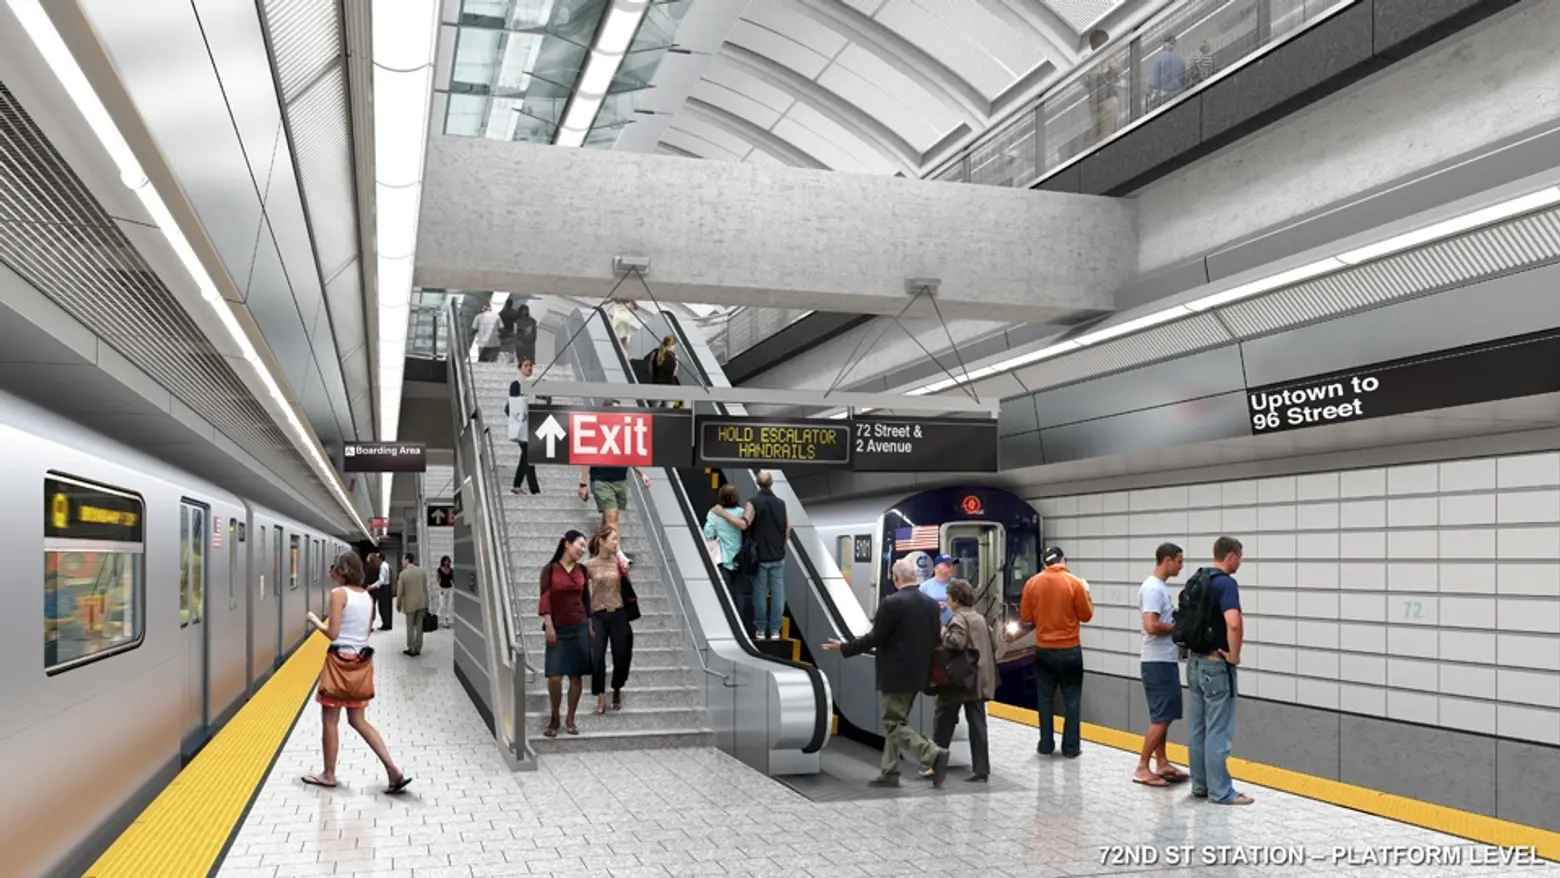 Second Avenue Subway will open in December without delay, officials say